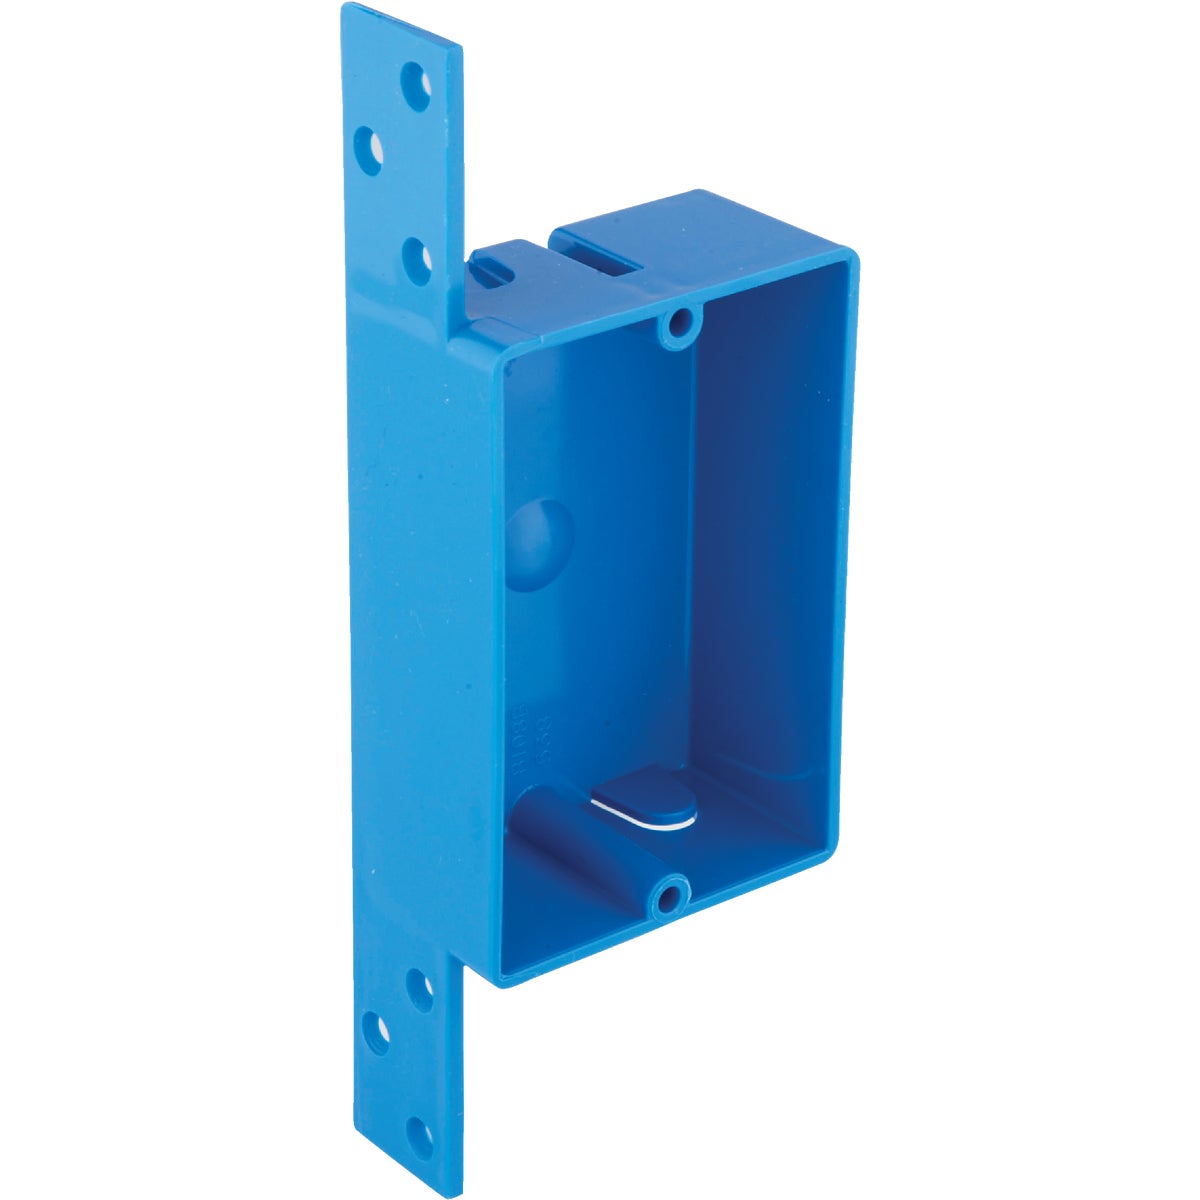 Item 527602, PVC (polyvinyl chloride) electrical wall box features easy installation.